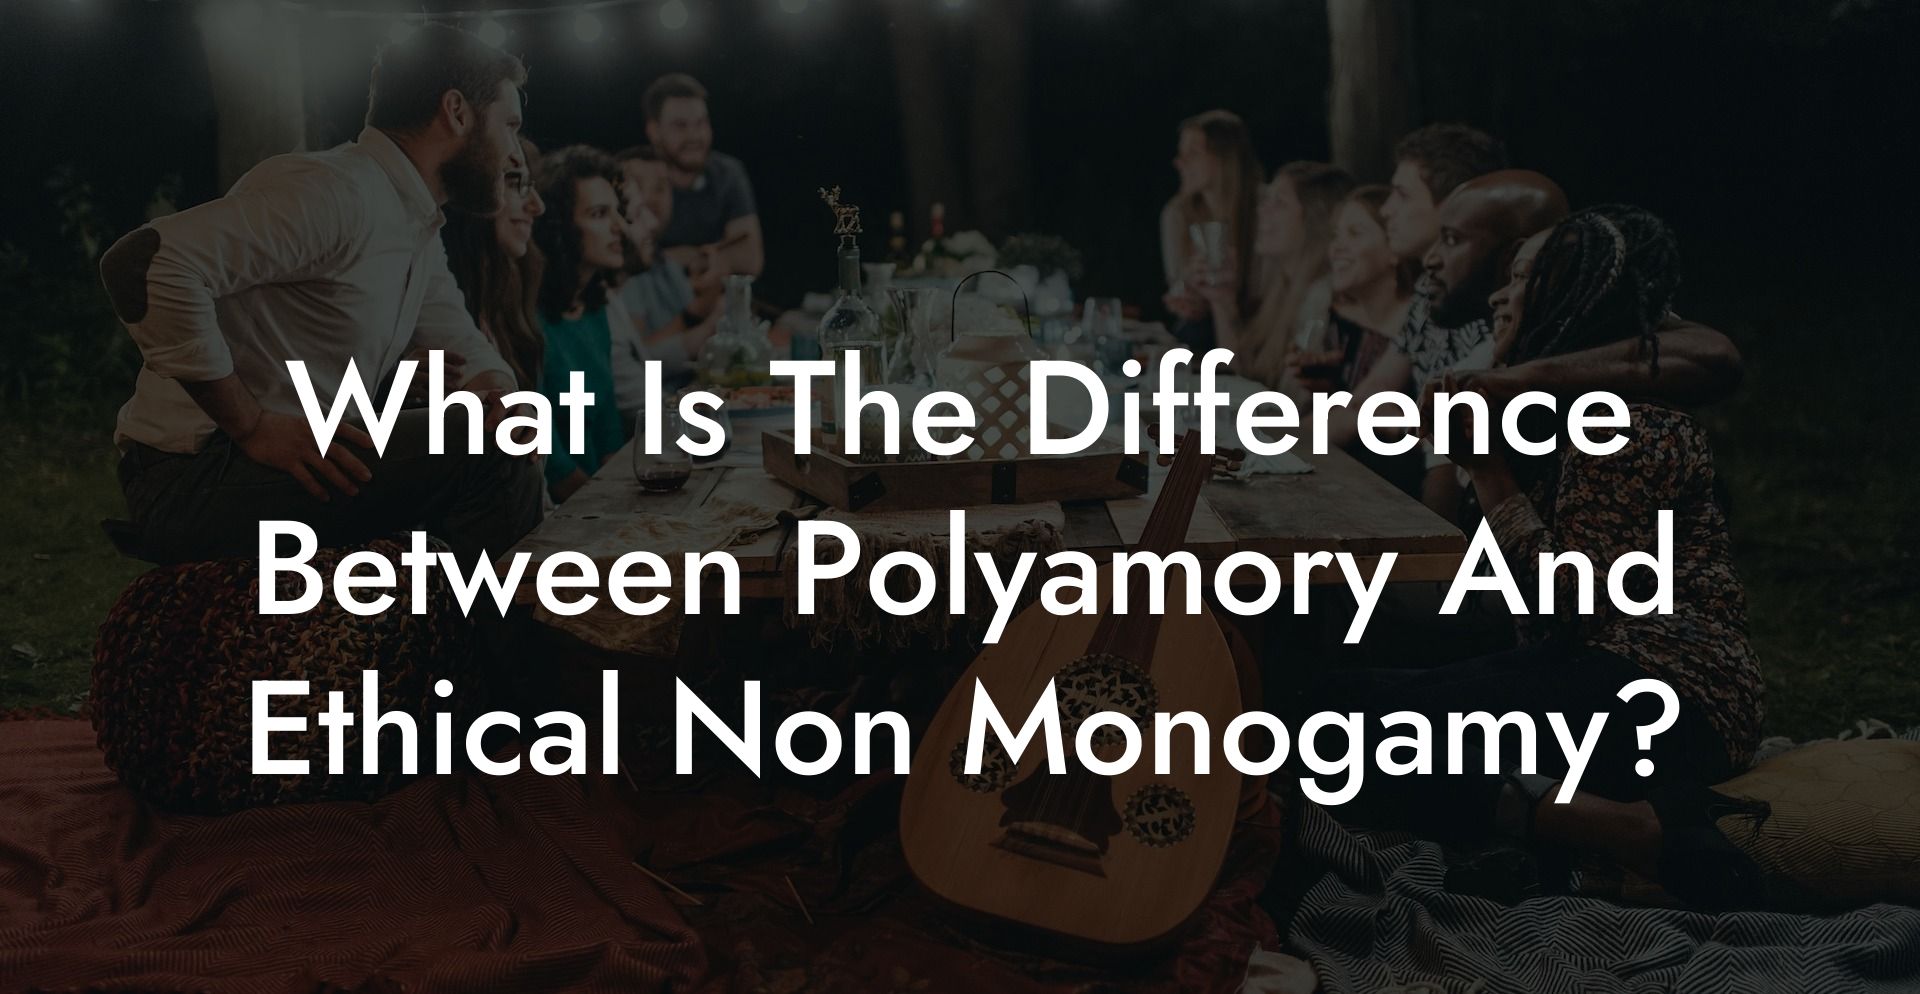 What Is The Difference Between Polyamory And Ethical Non Monogamy?